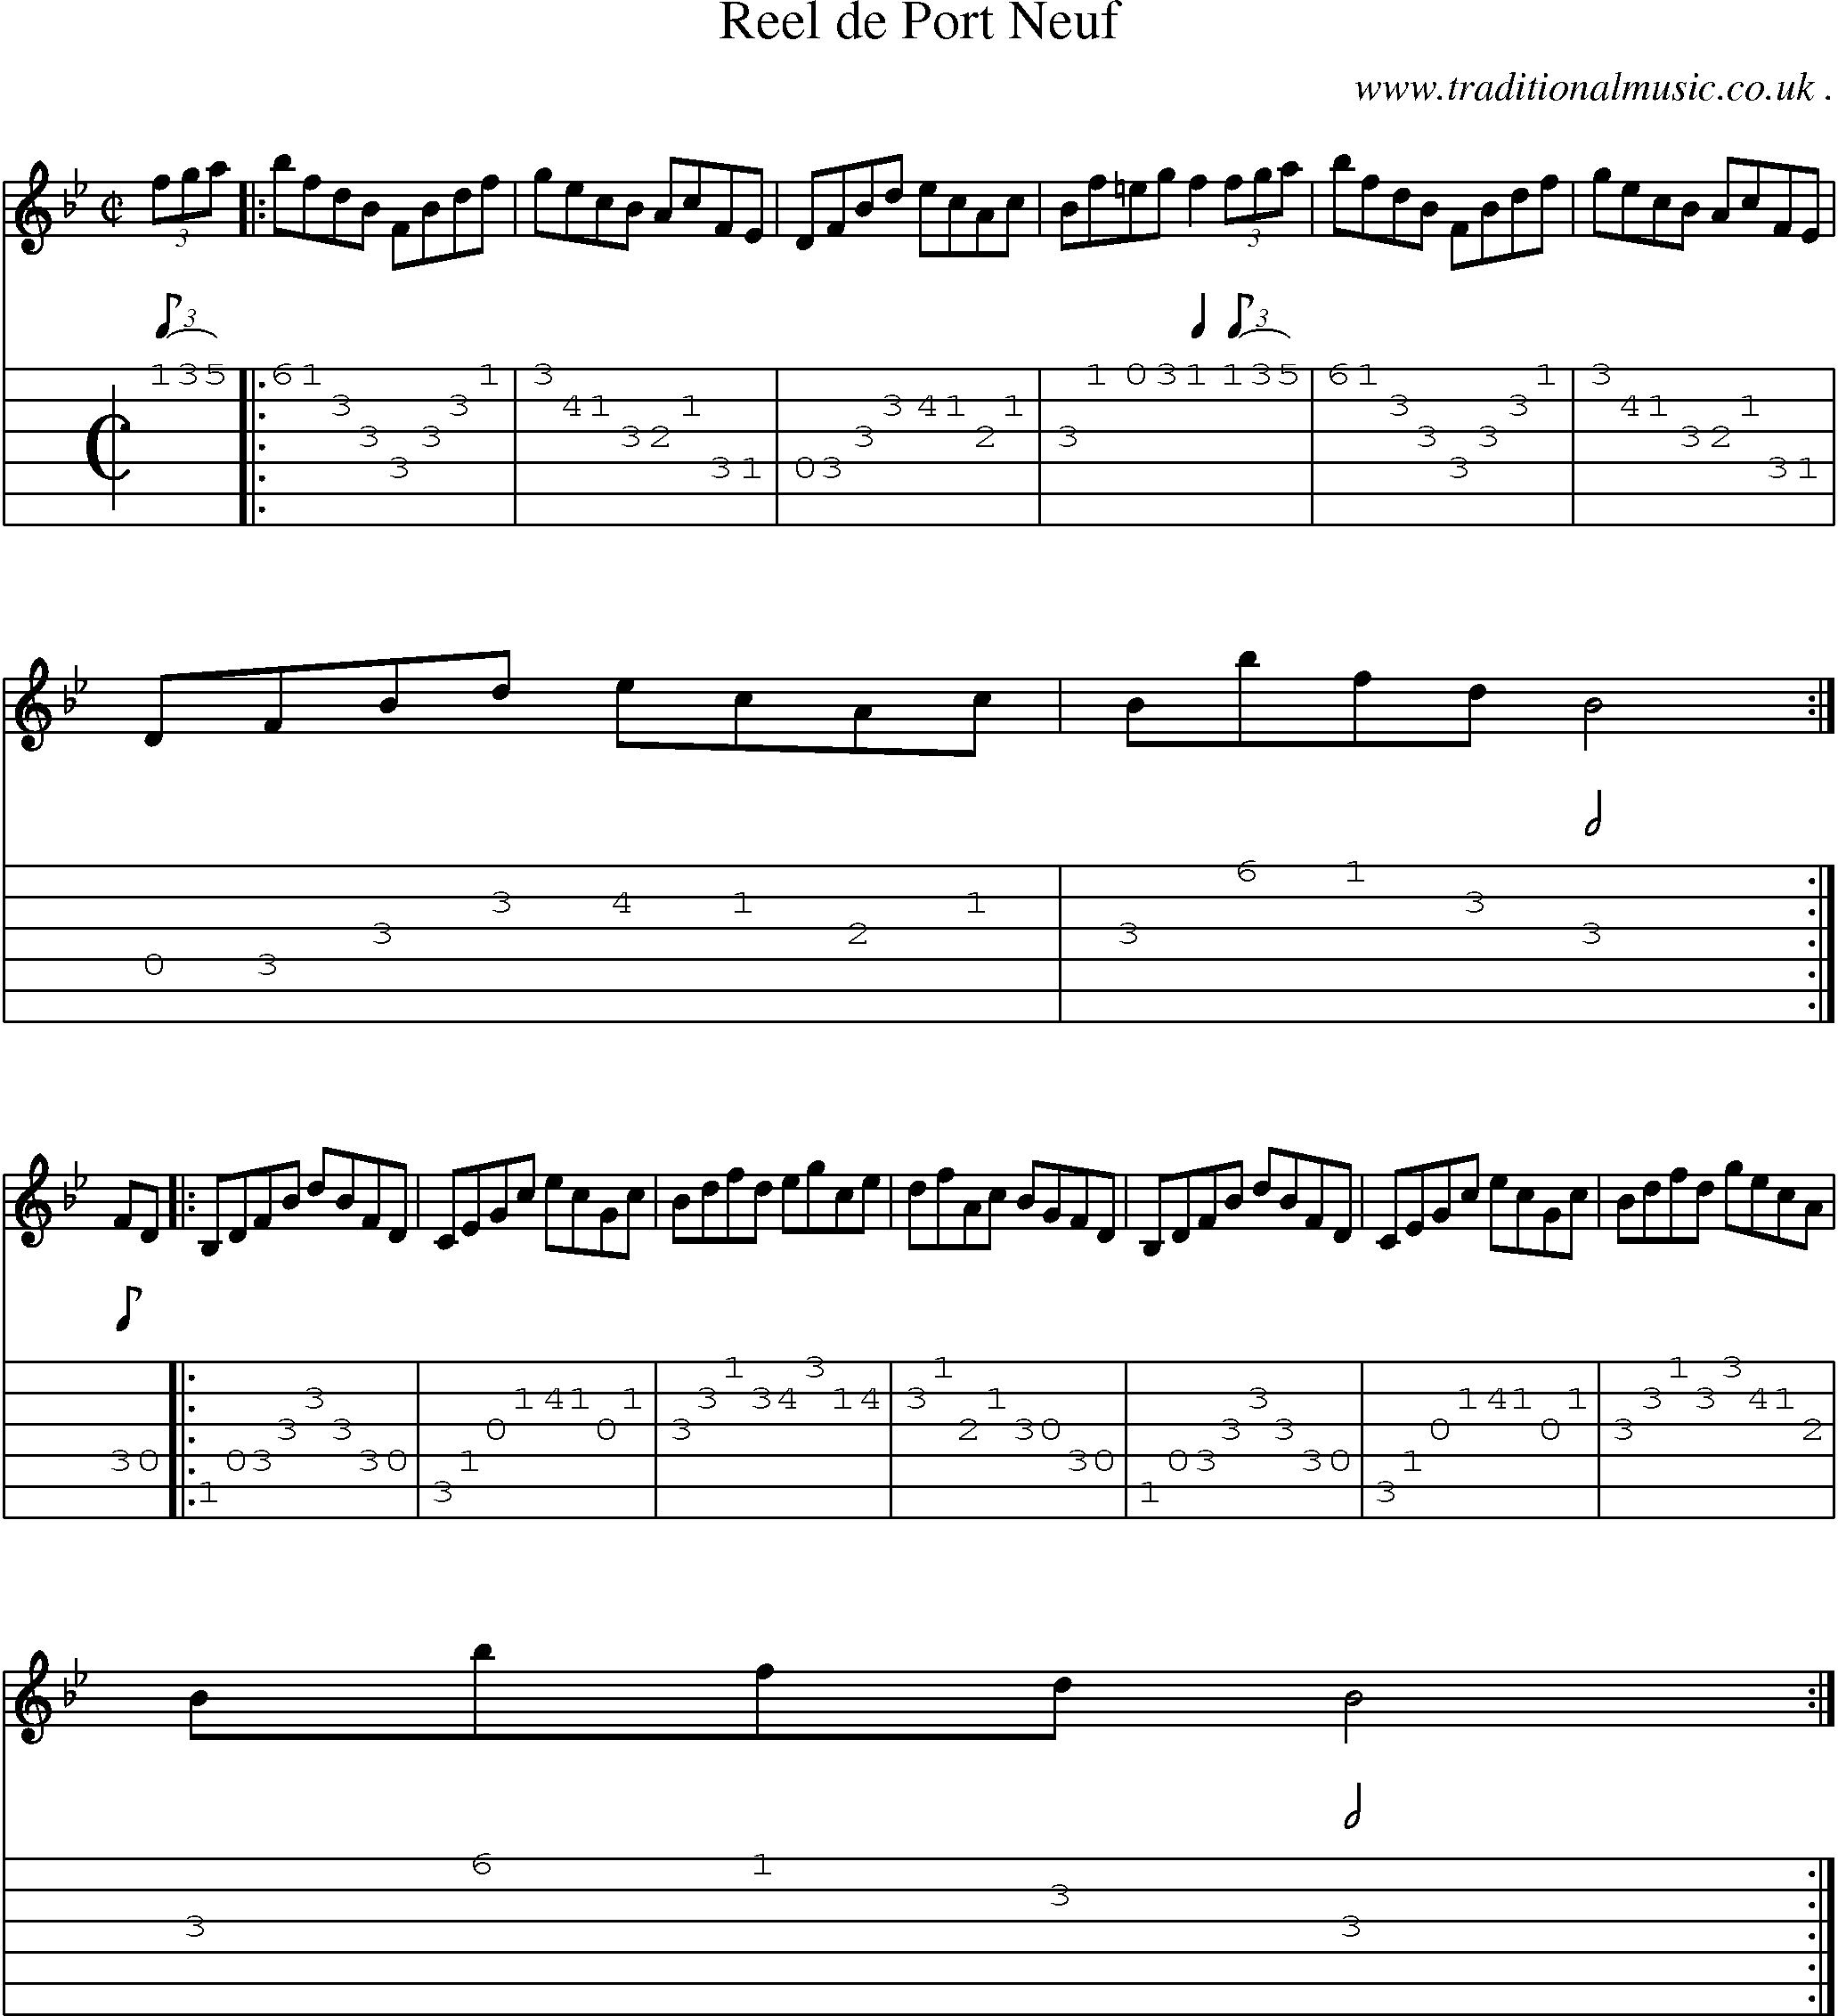 Sheet-Music and Guitar Tabs for Reel De Port Neuf